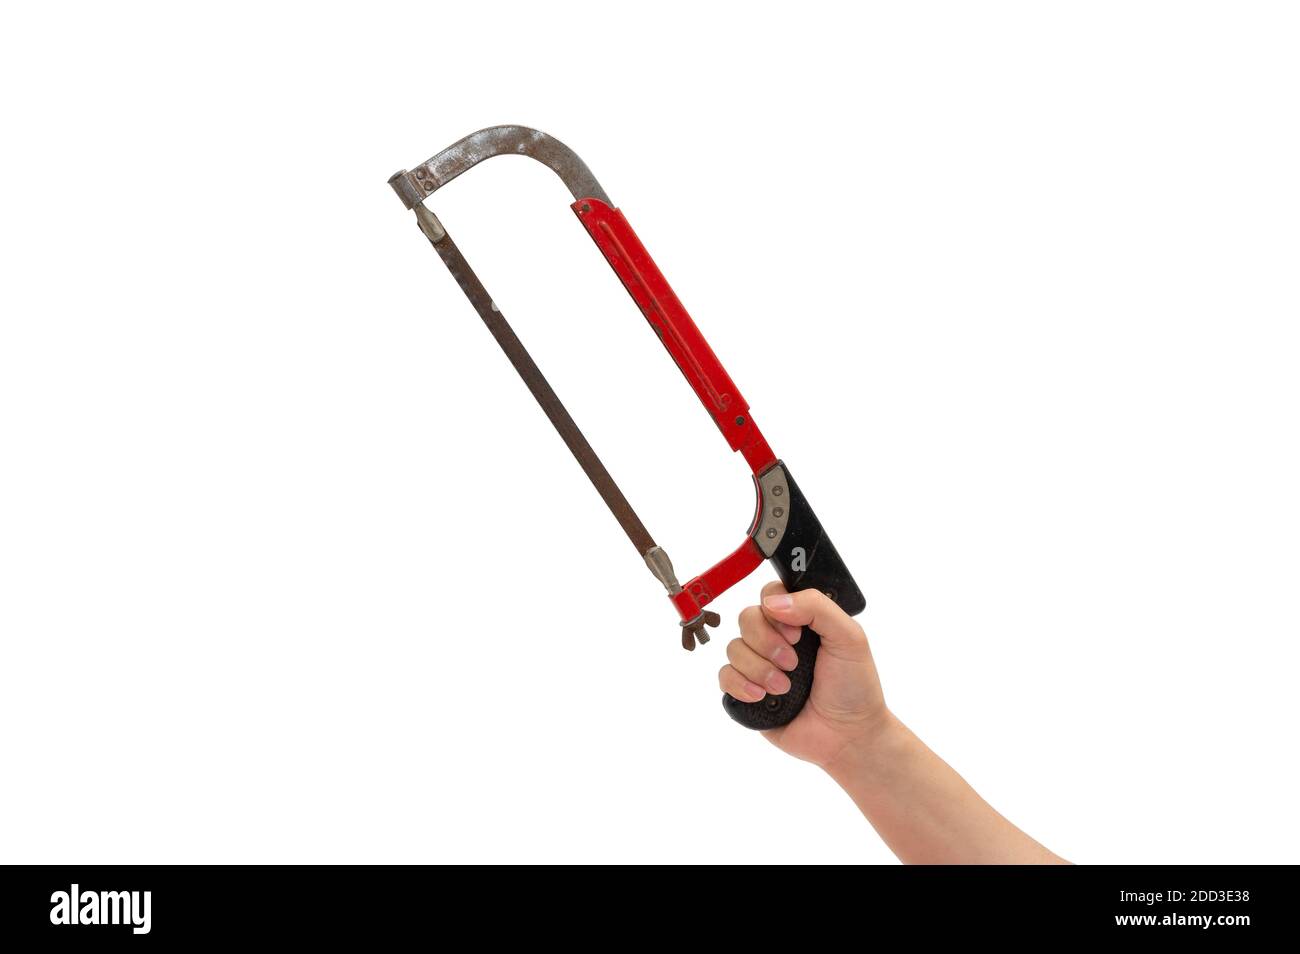 Hand of a gloved man holding a hacksaw. Isolated white background. Stock Photo